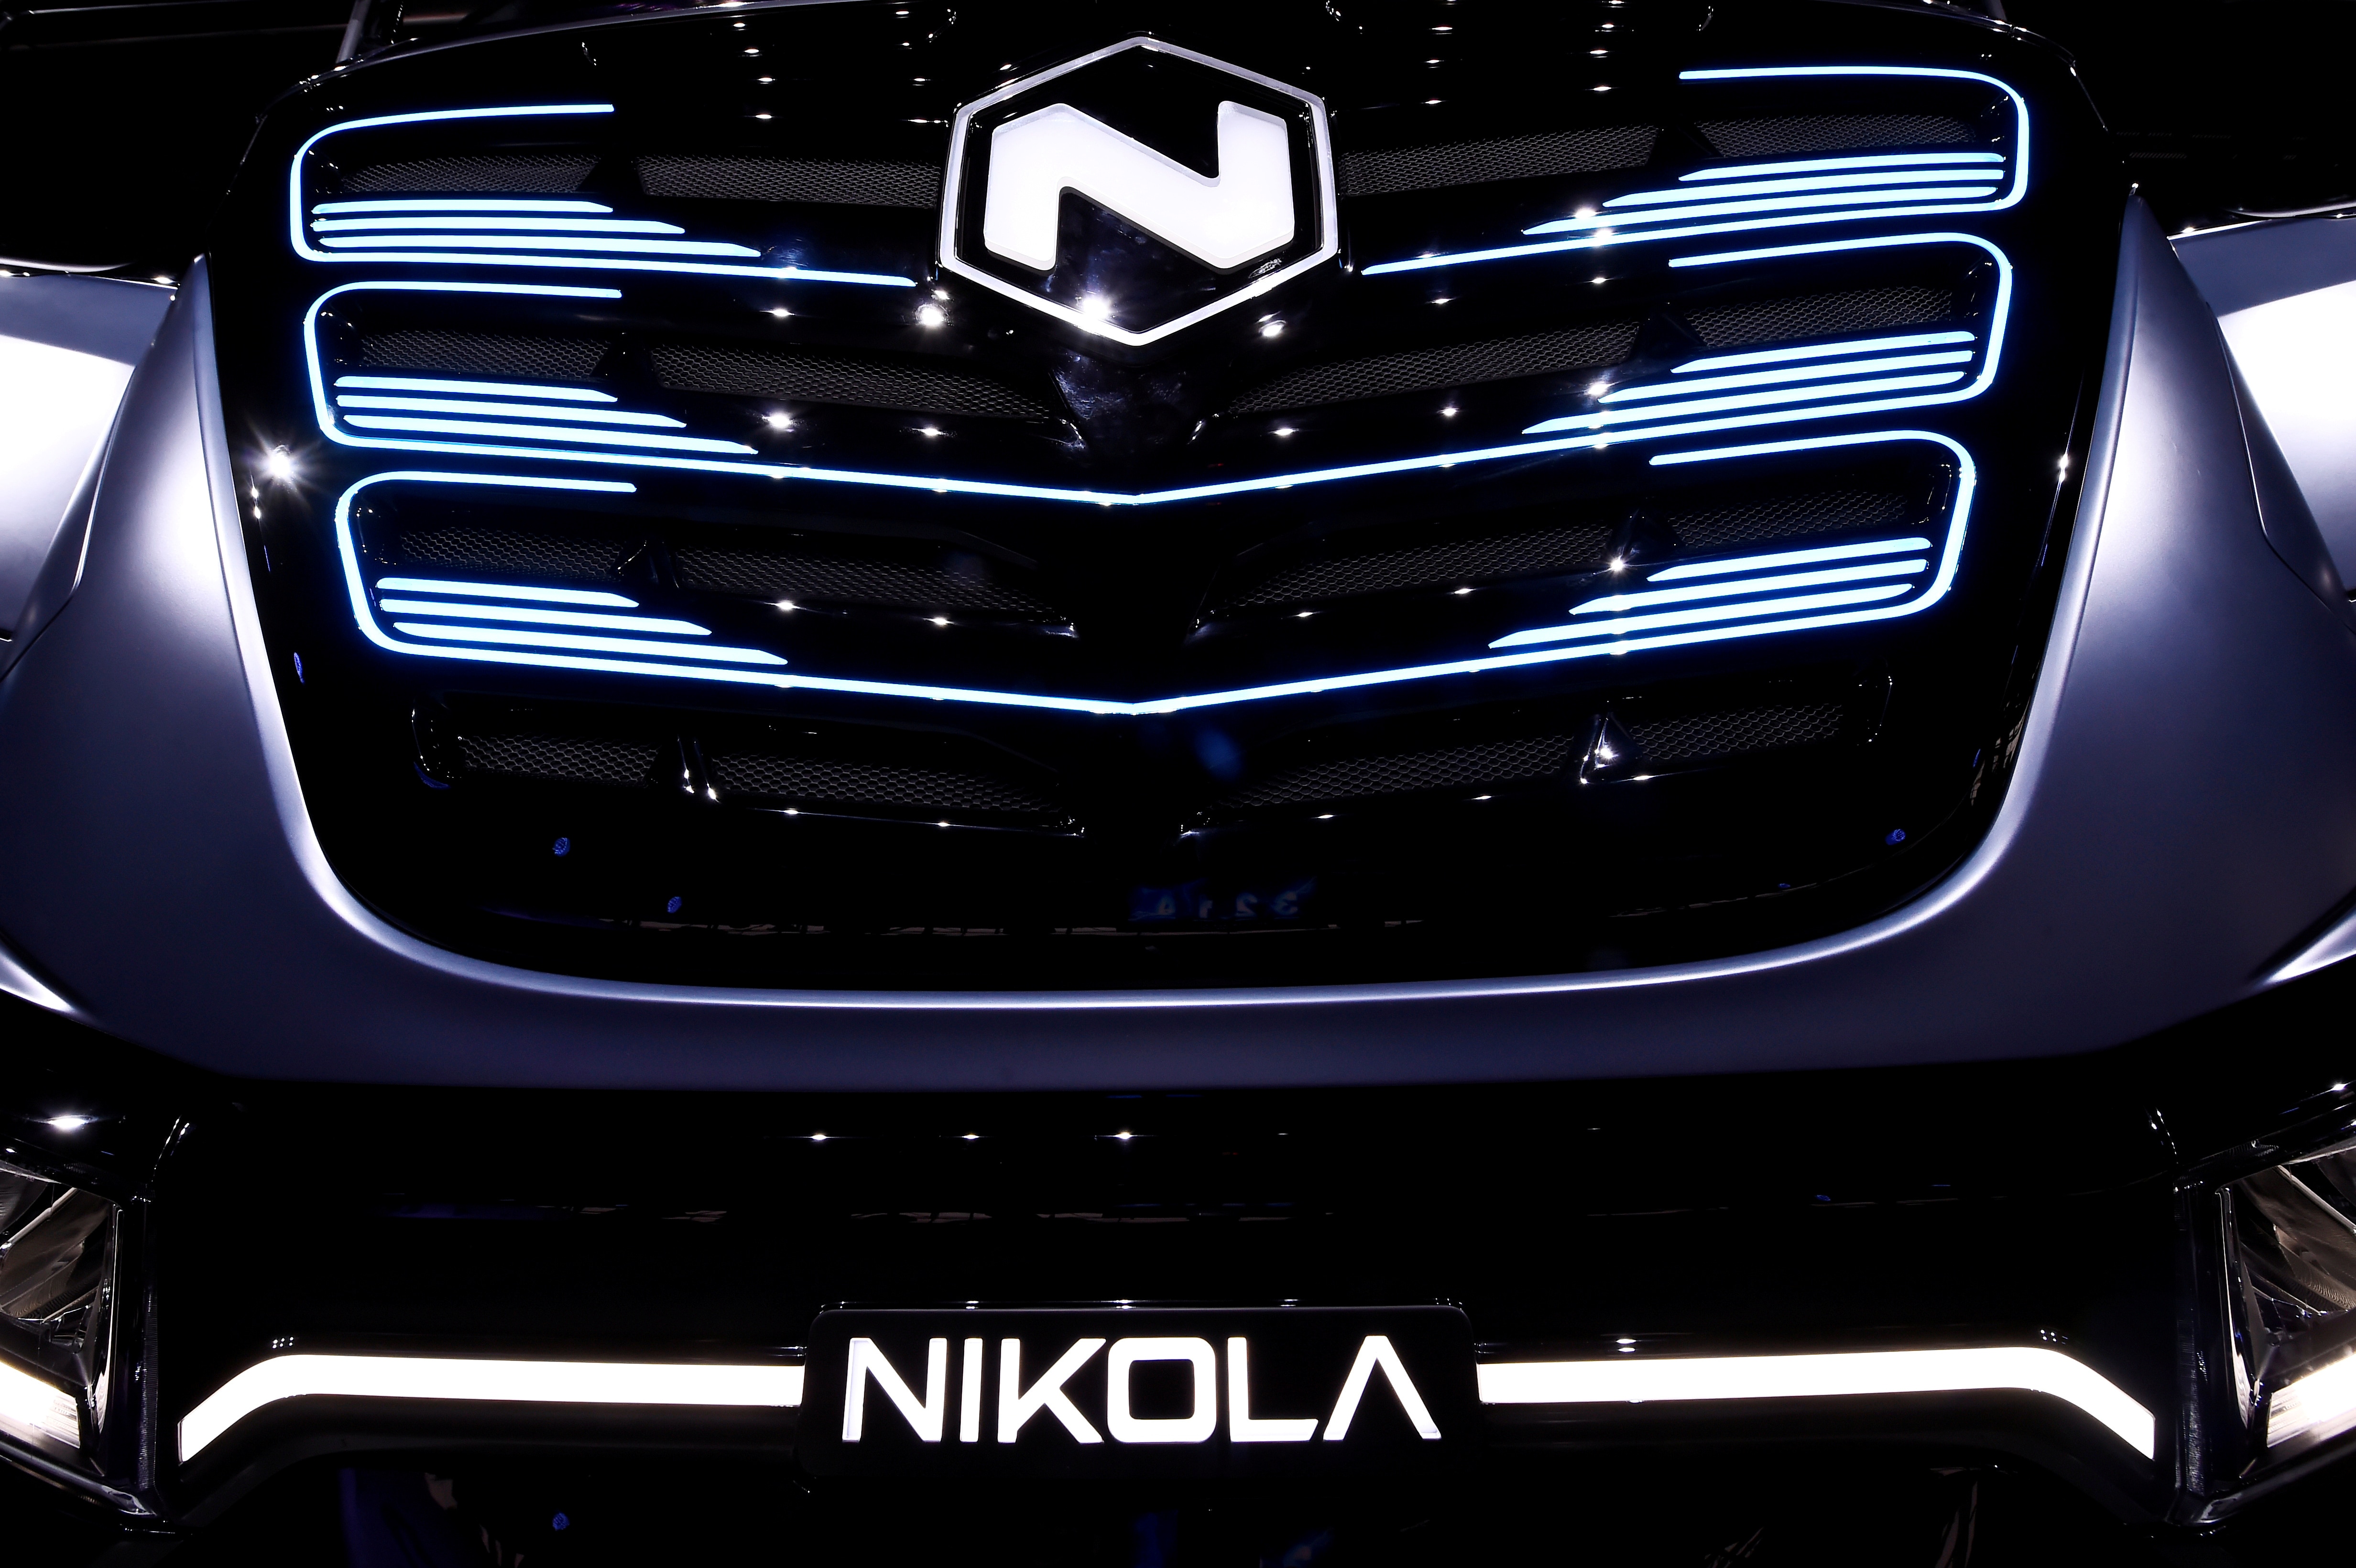 File photo - Nikola's logo is pictured at an event in Turin, Italy.